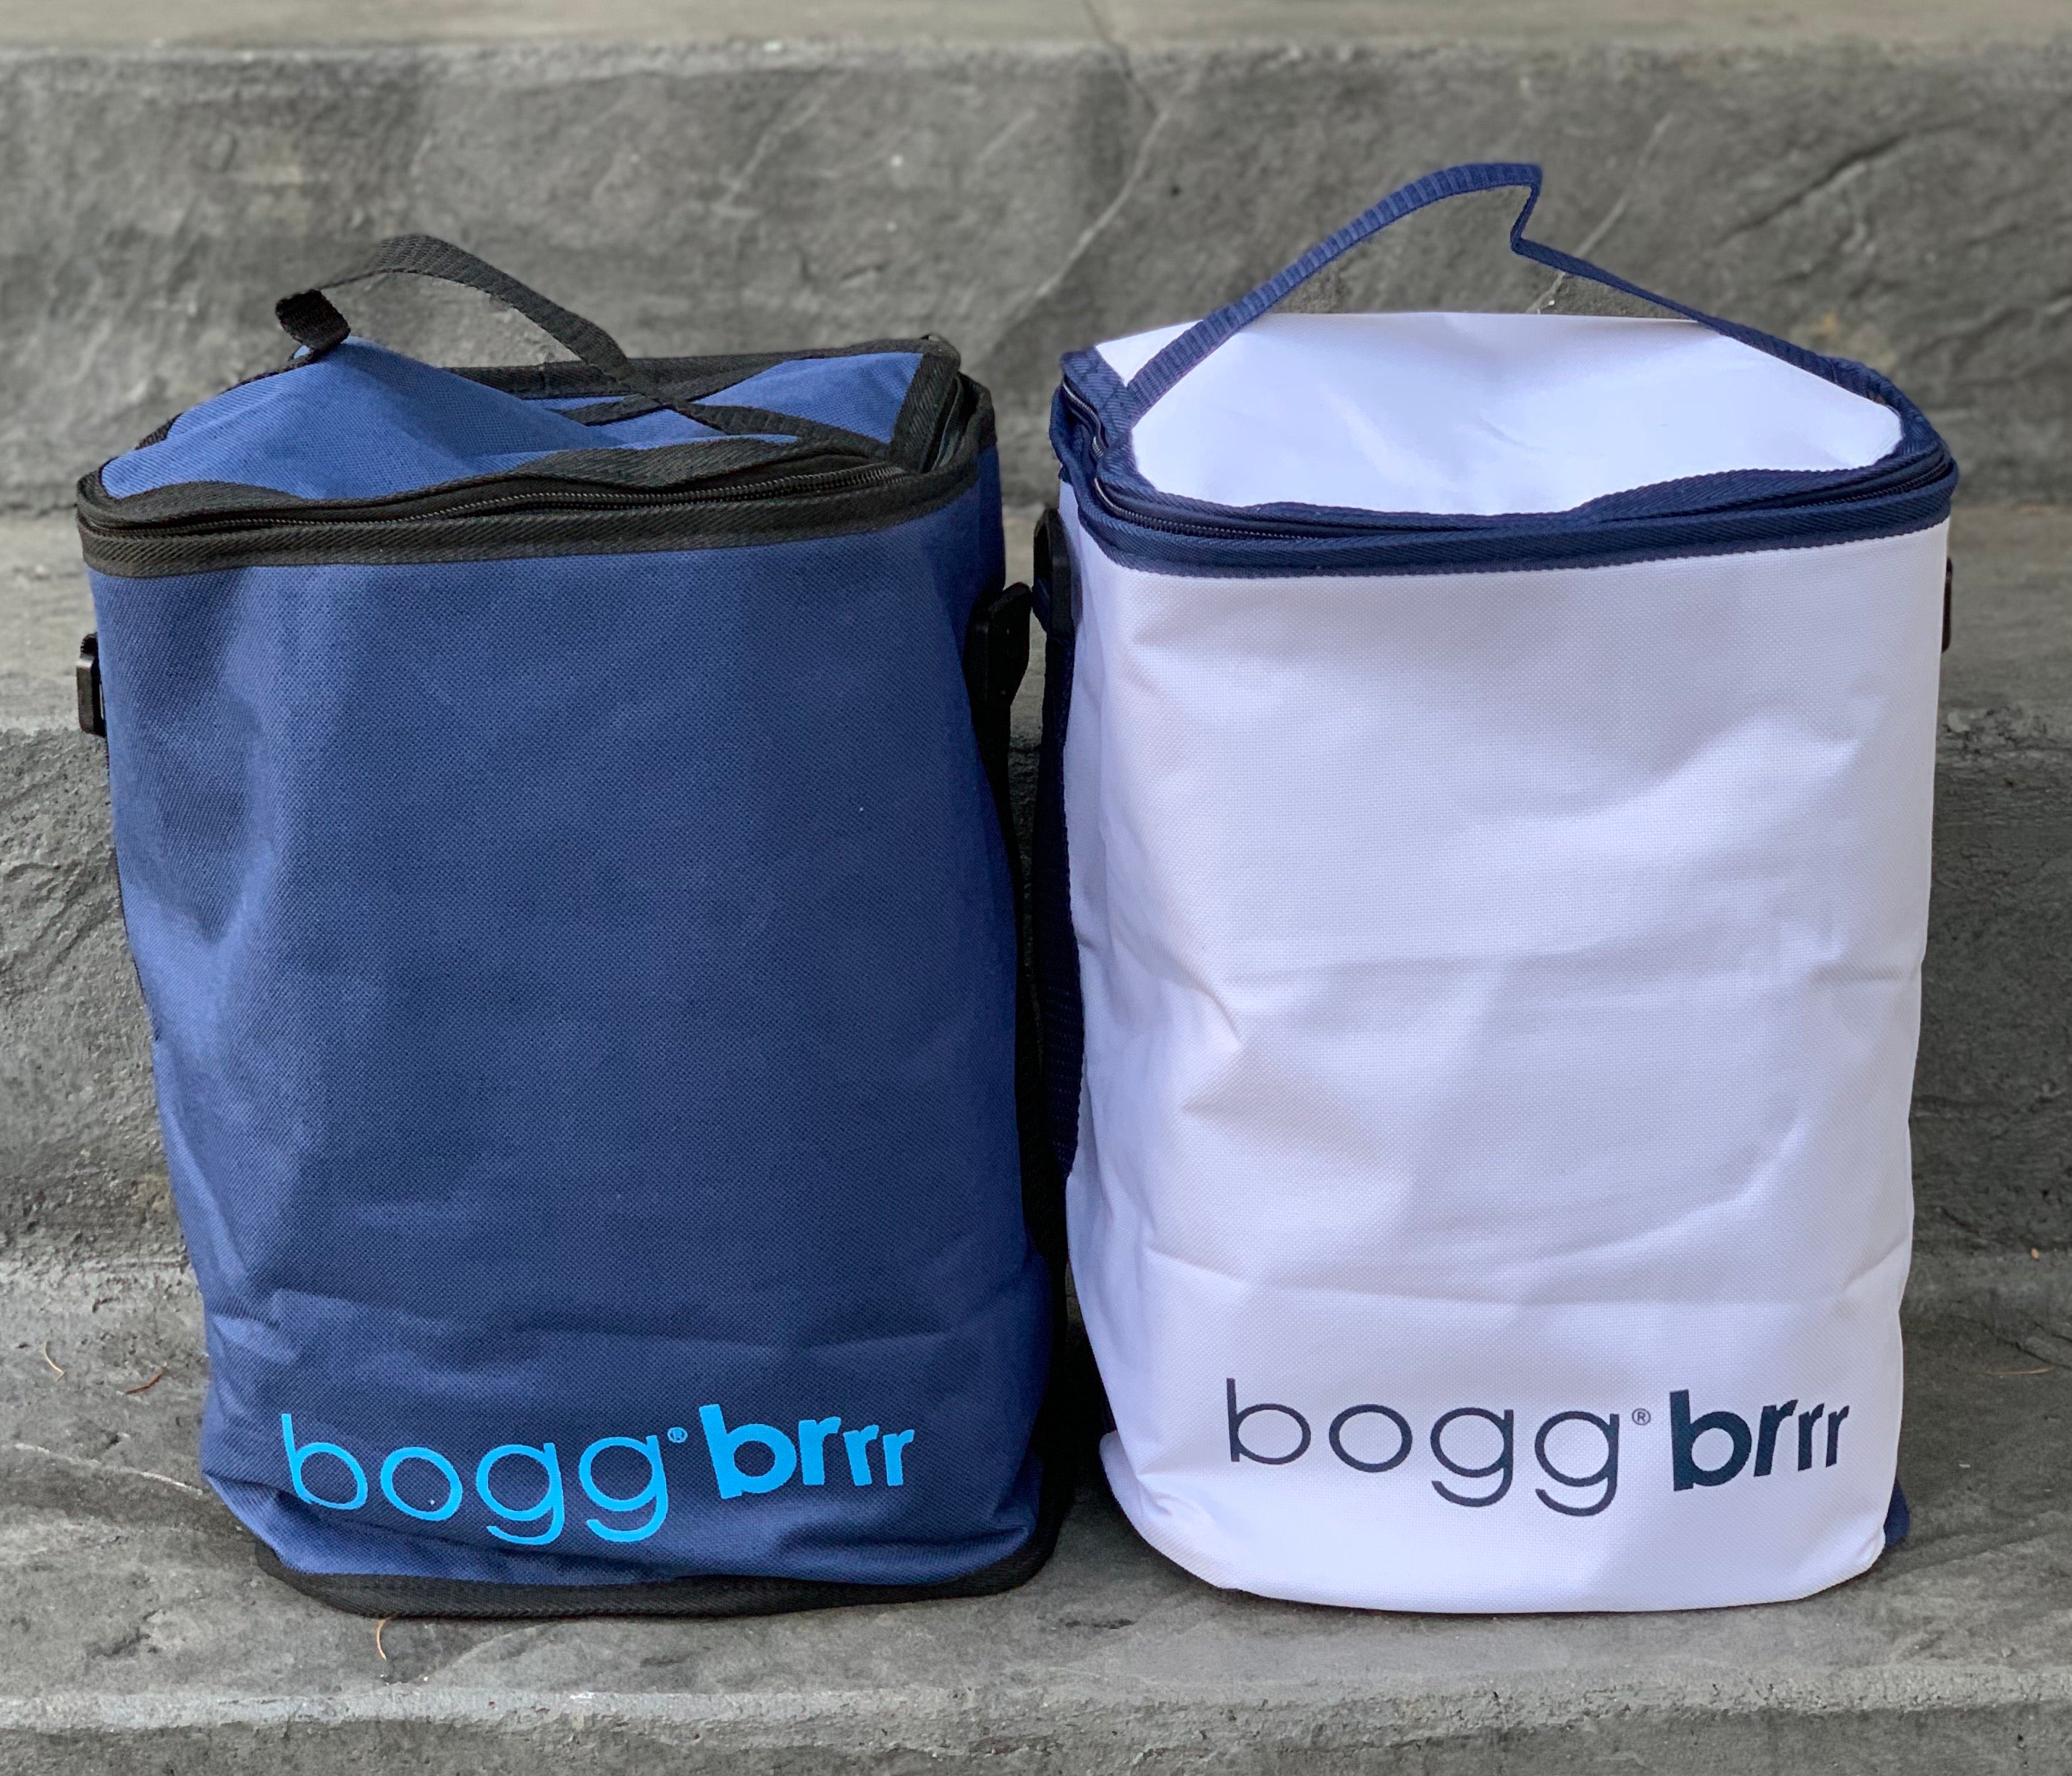 Bogg Brrr and a Half Cooler Inserts – The Bugs Ear